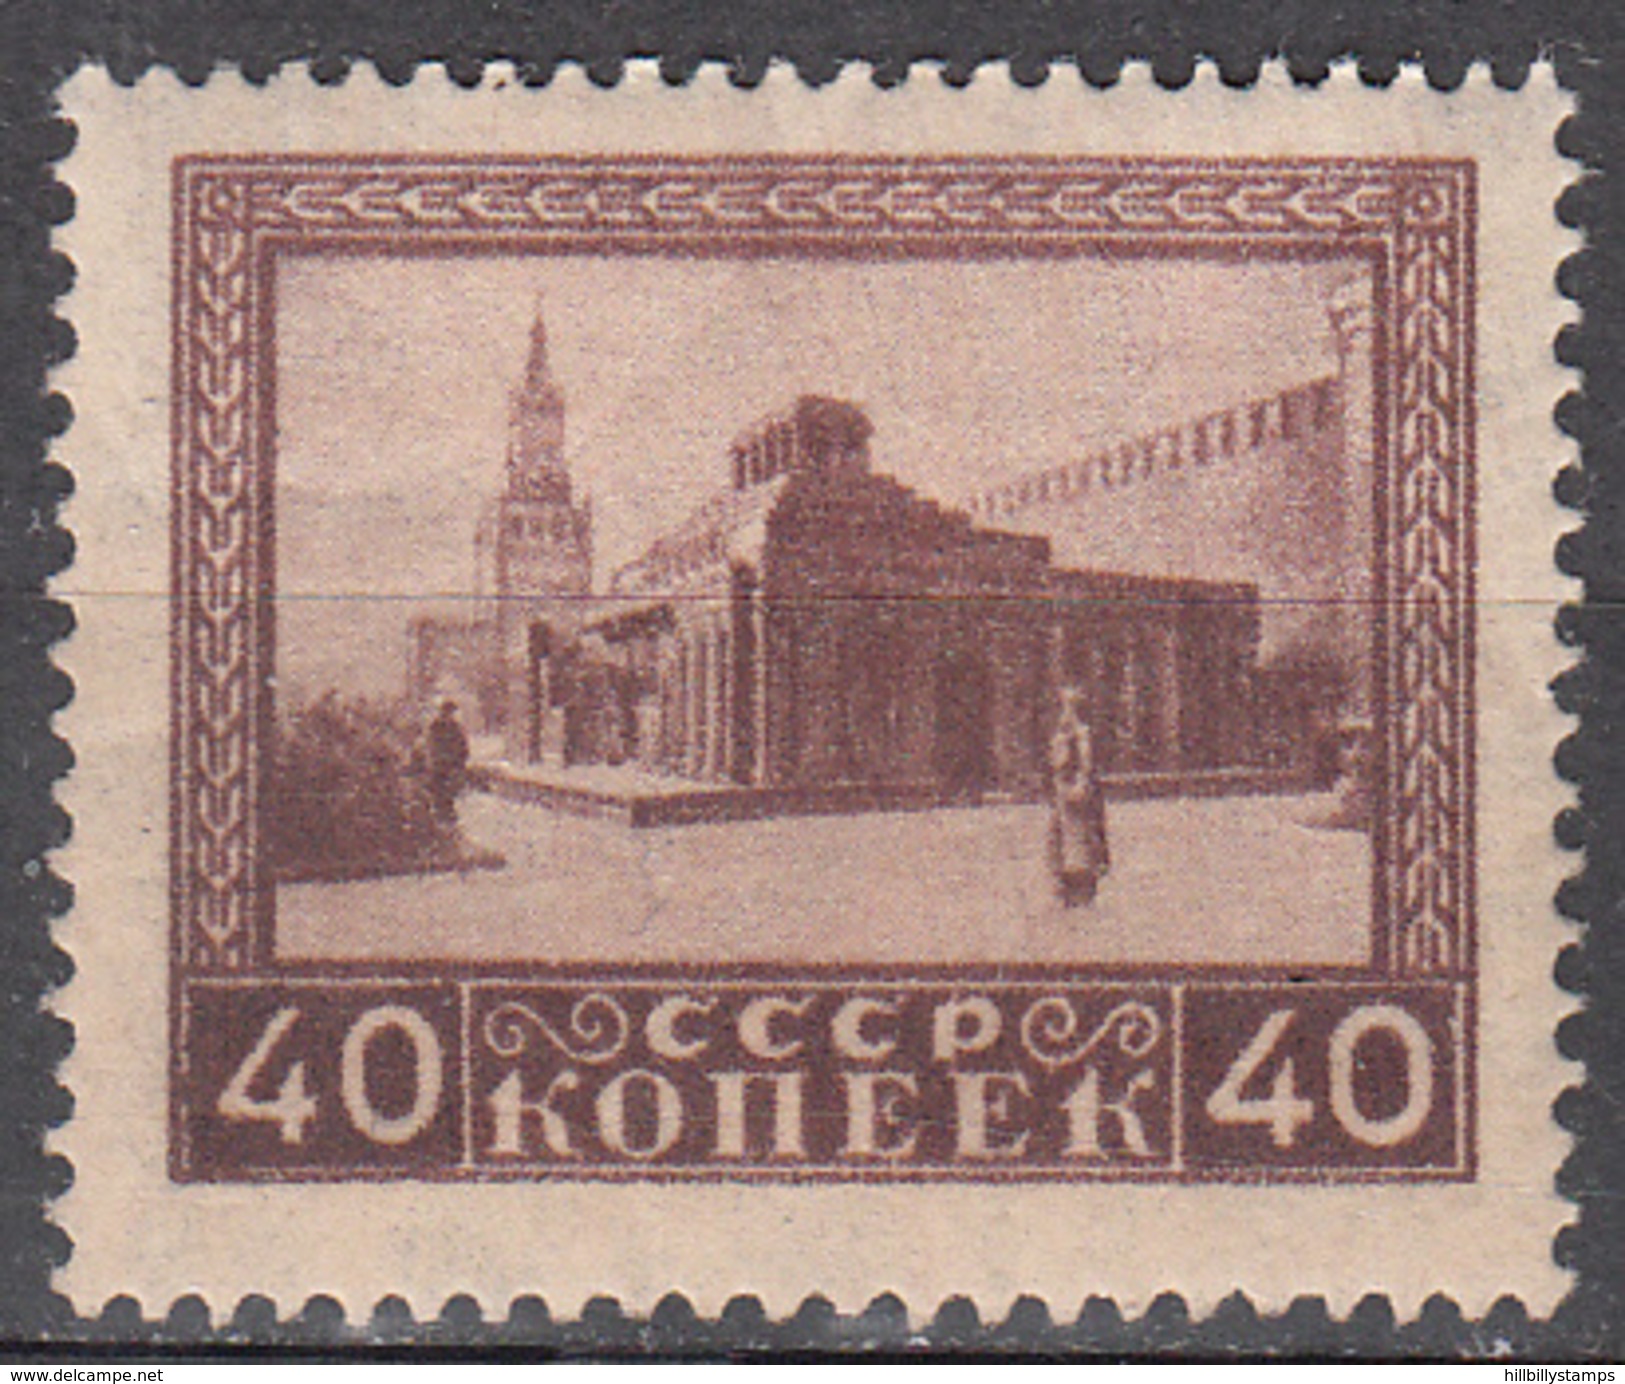 RUSSIA       SCOTT NO.  301    MINT HINGED       YEAR  1925   THICK PAPER - Unused Stamps